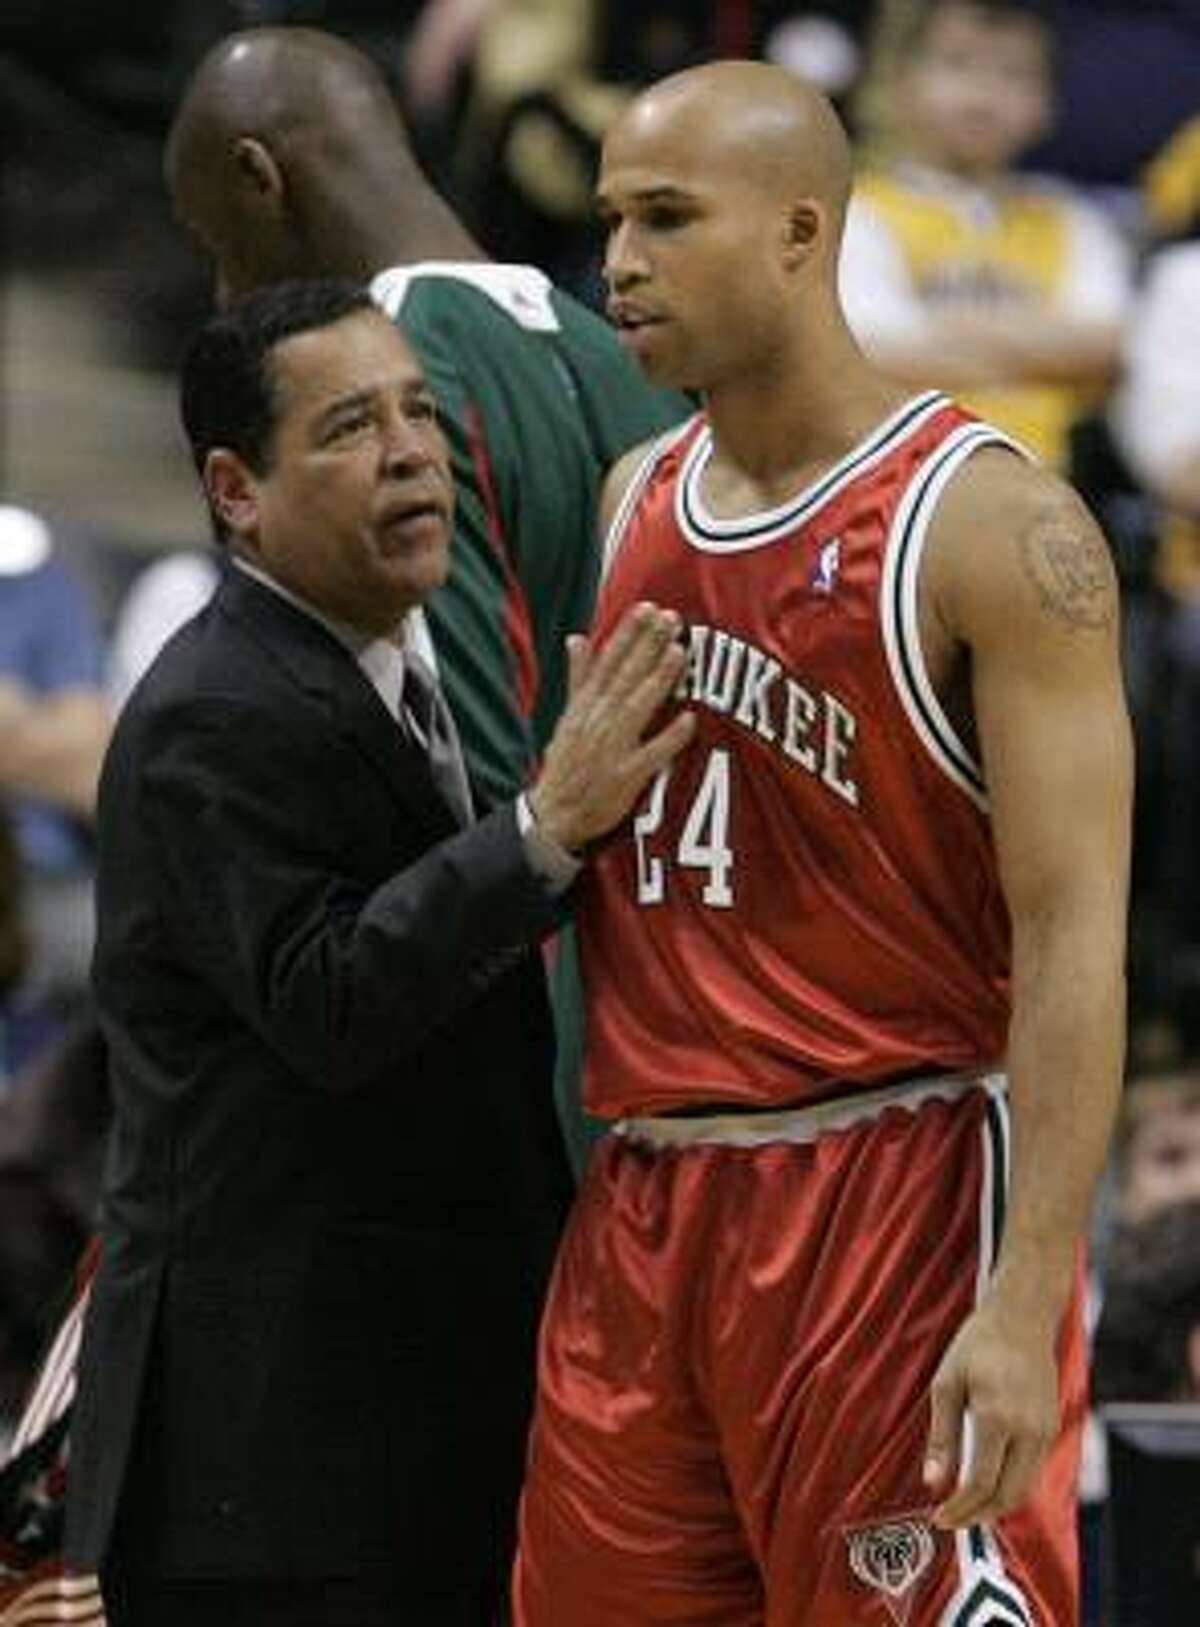 Bucks assistant coach Kelvin Sampson, left, served as head coach at Indiana and Oklahoma before moving to the NBA.